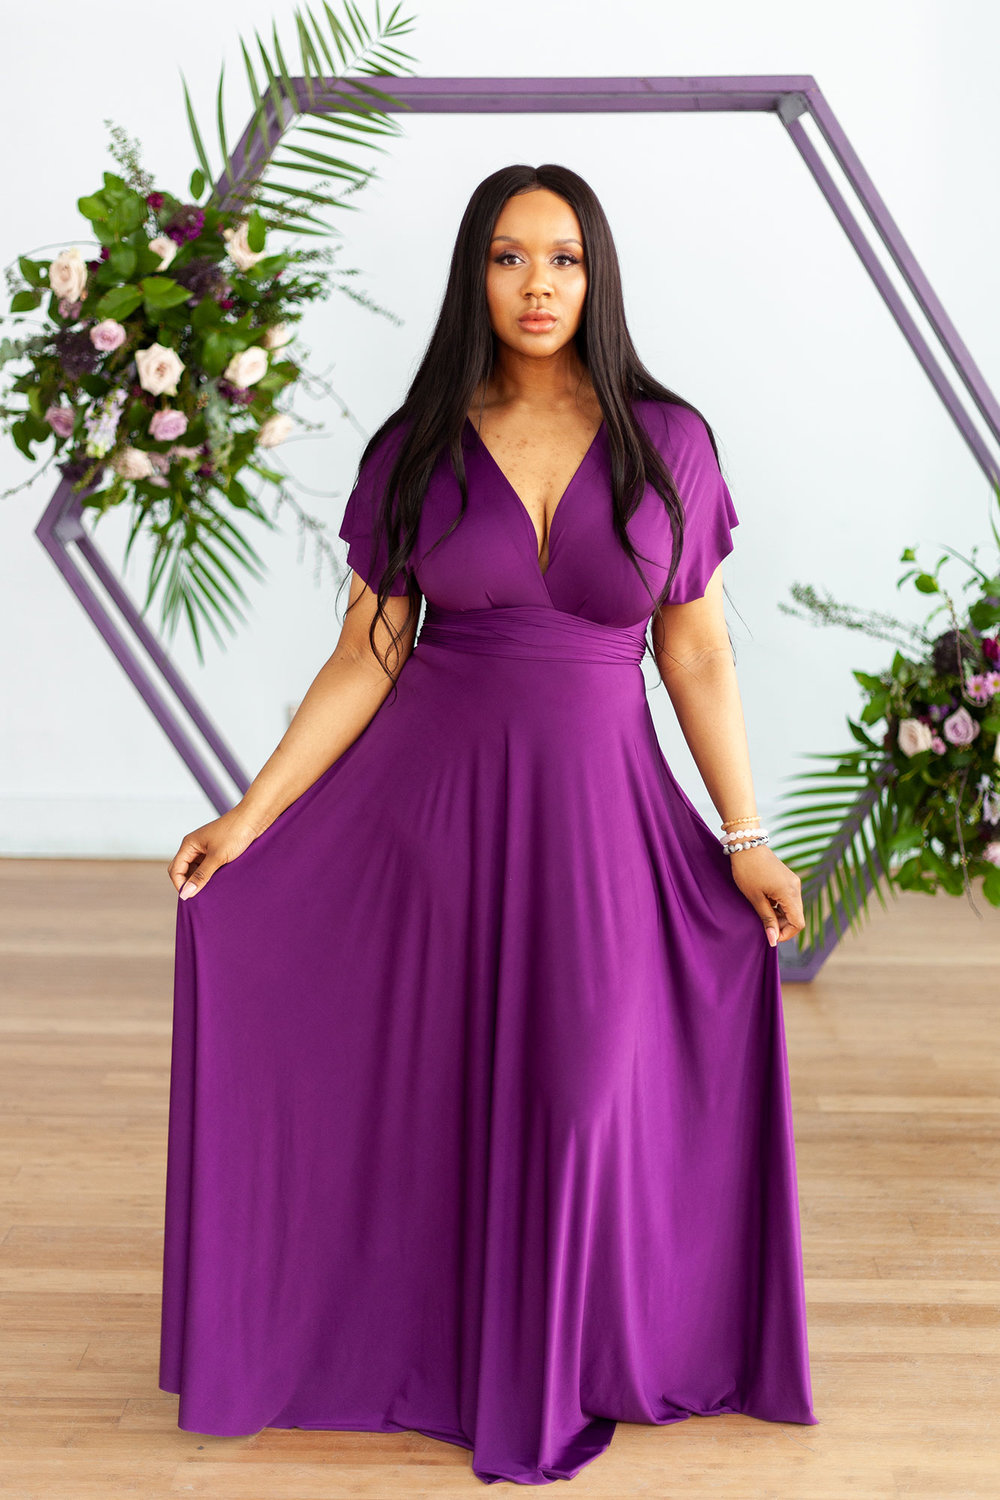 Henkaa fall wedding collection with bridesmaid in plum purple dress